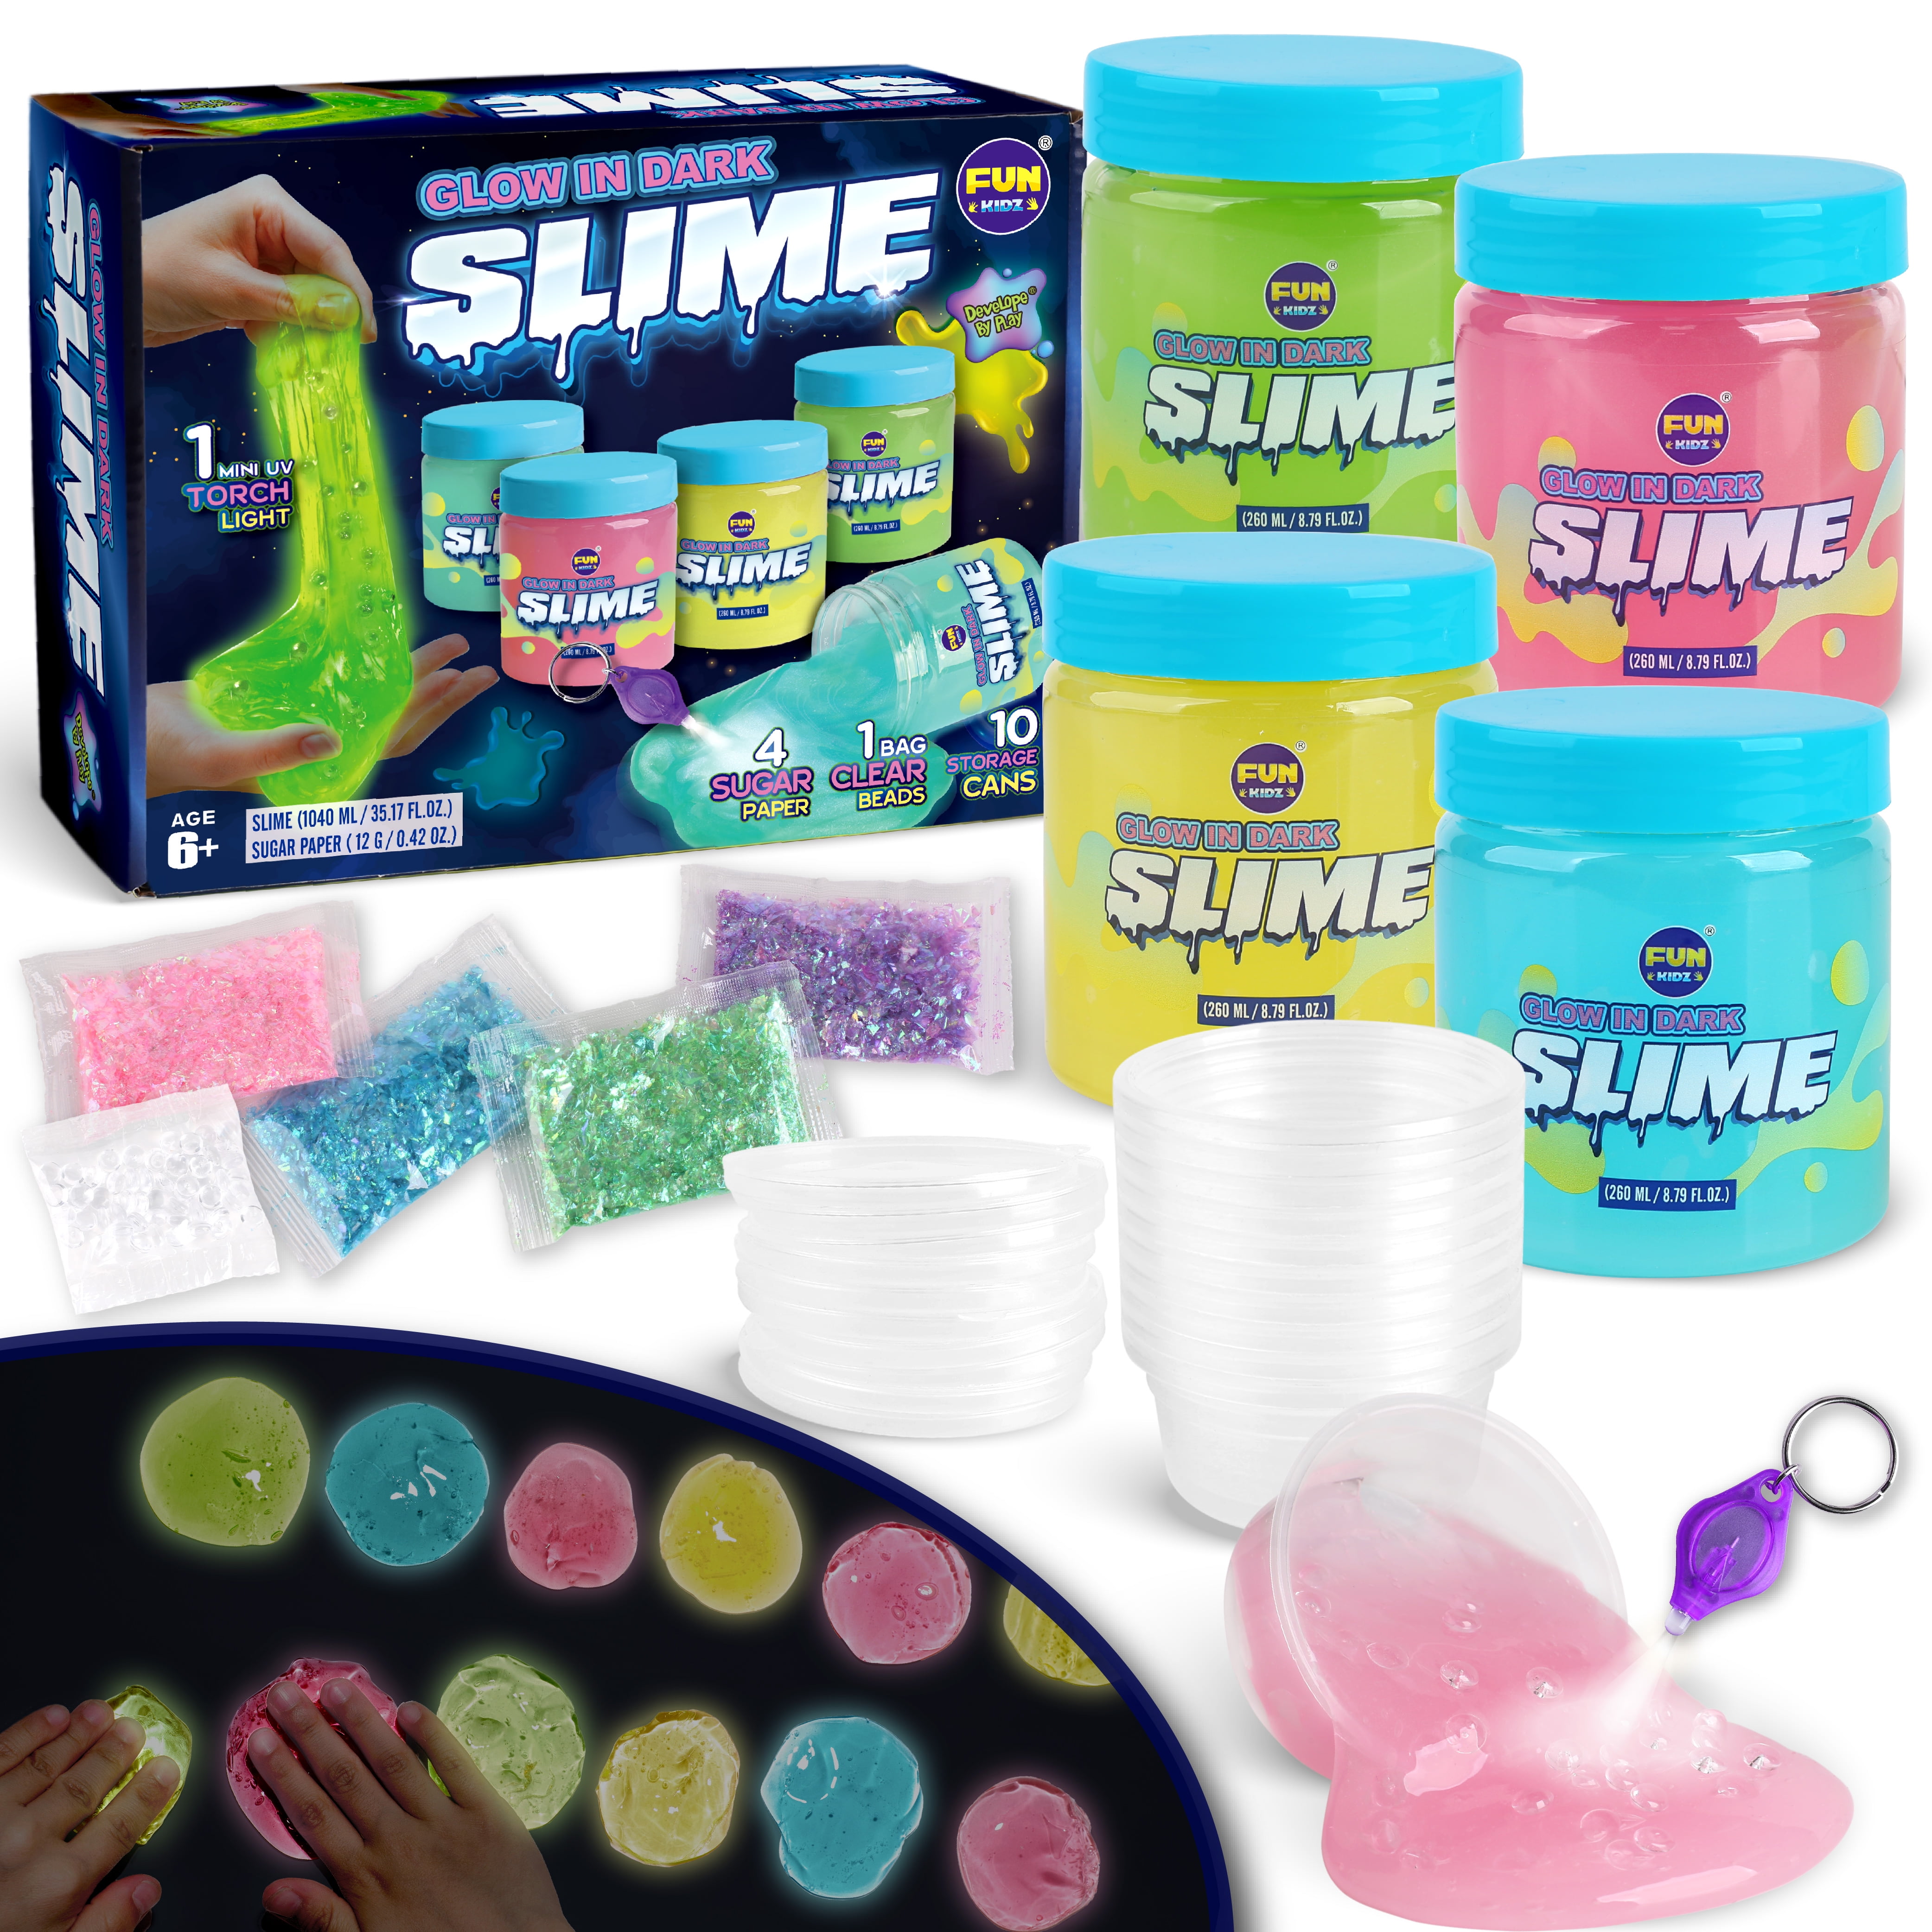 19 Slime Add Ins to Make Your Slime Even Cooler!